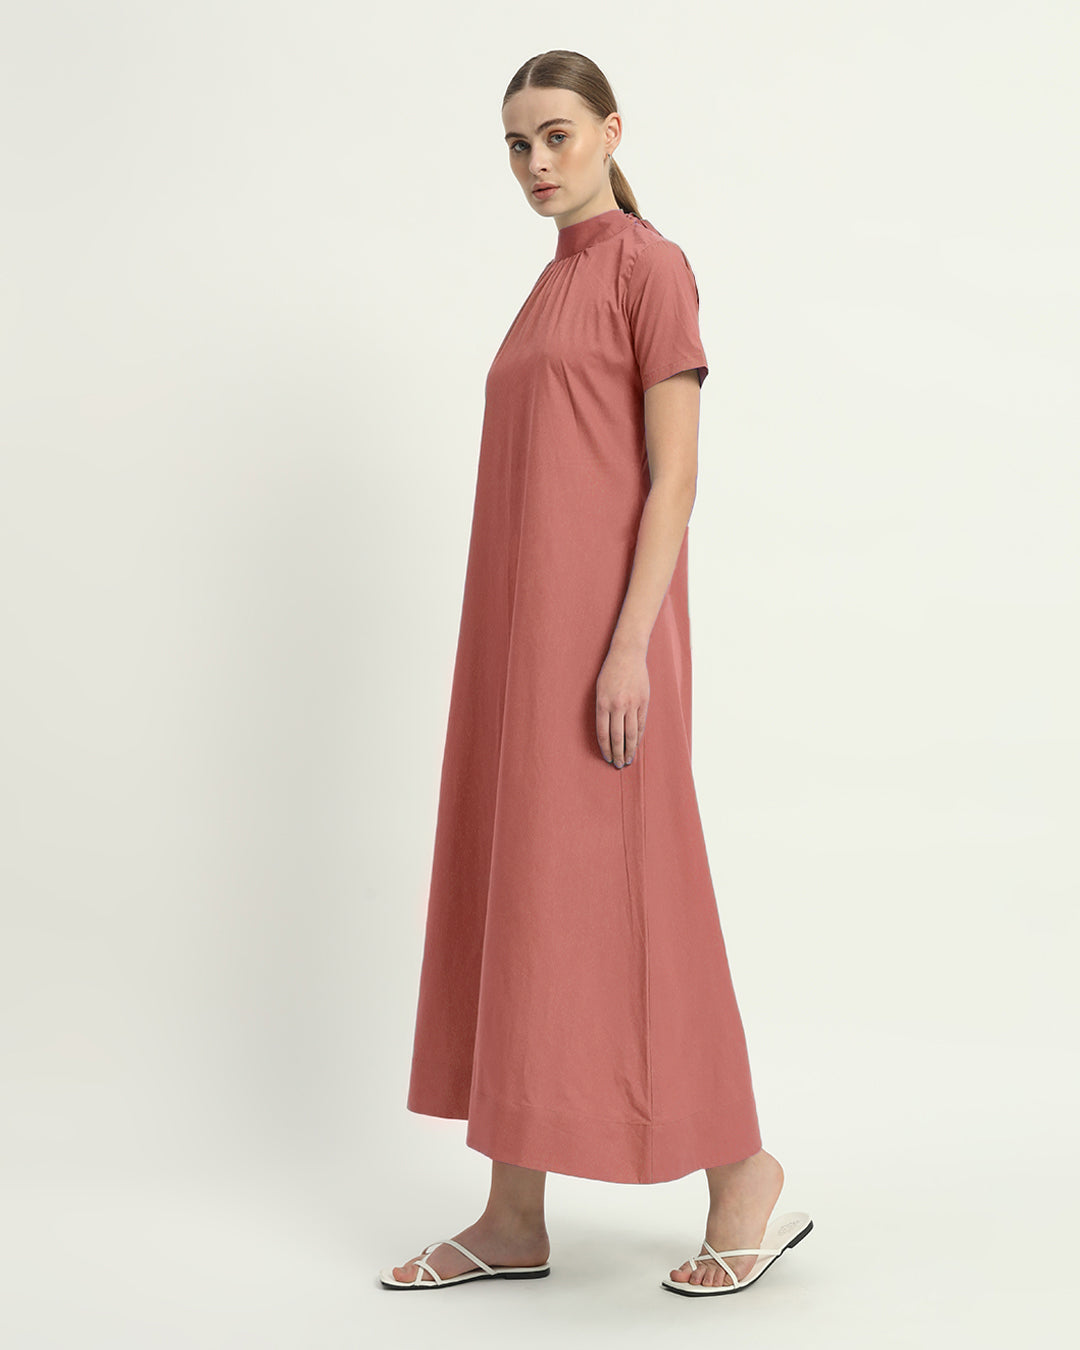 The Ivory Pink Hermon Cotton Dress